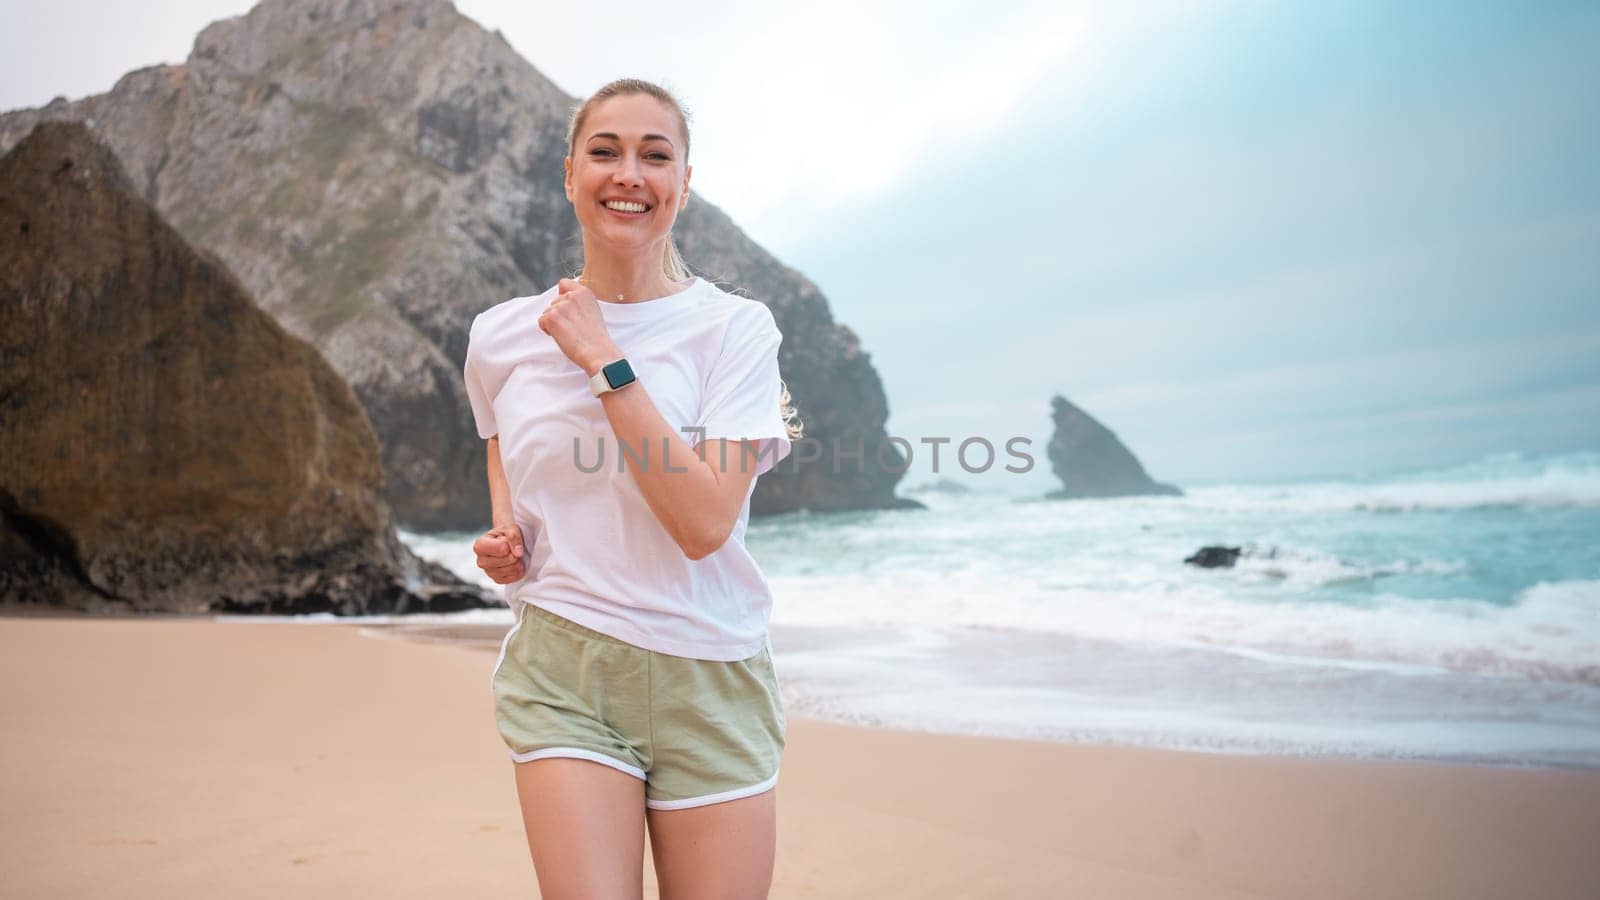 Woman smiling and jogging on beach with sky and rocks in background. Woman in white t-shirt and light green athletic shorts jog on beach. Athletic smiling woman running on sandy beach at seaside